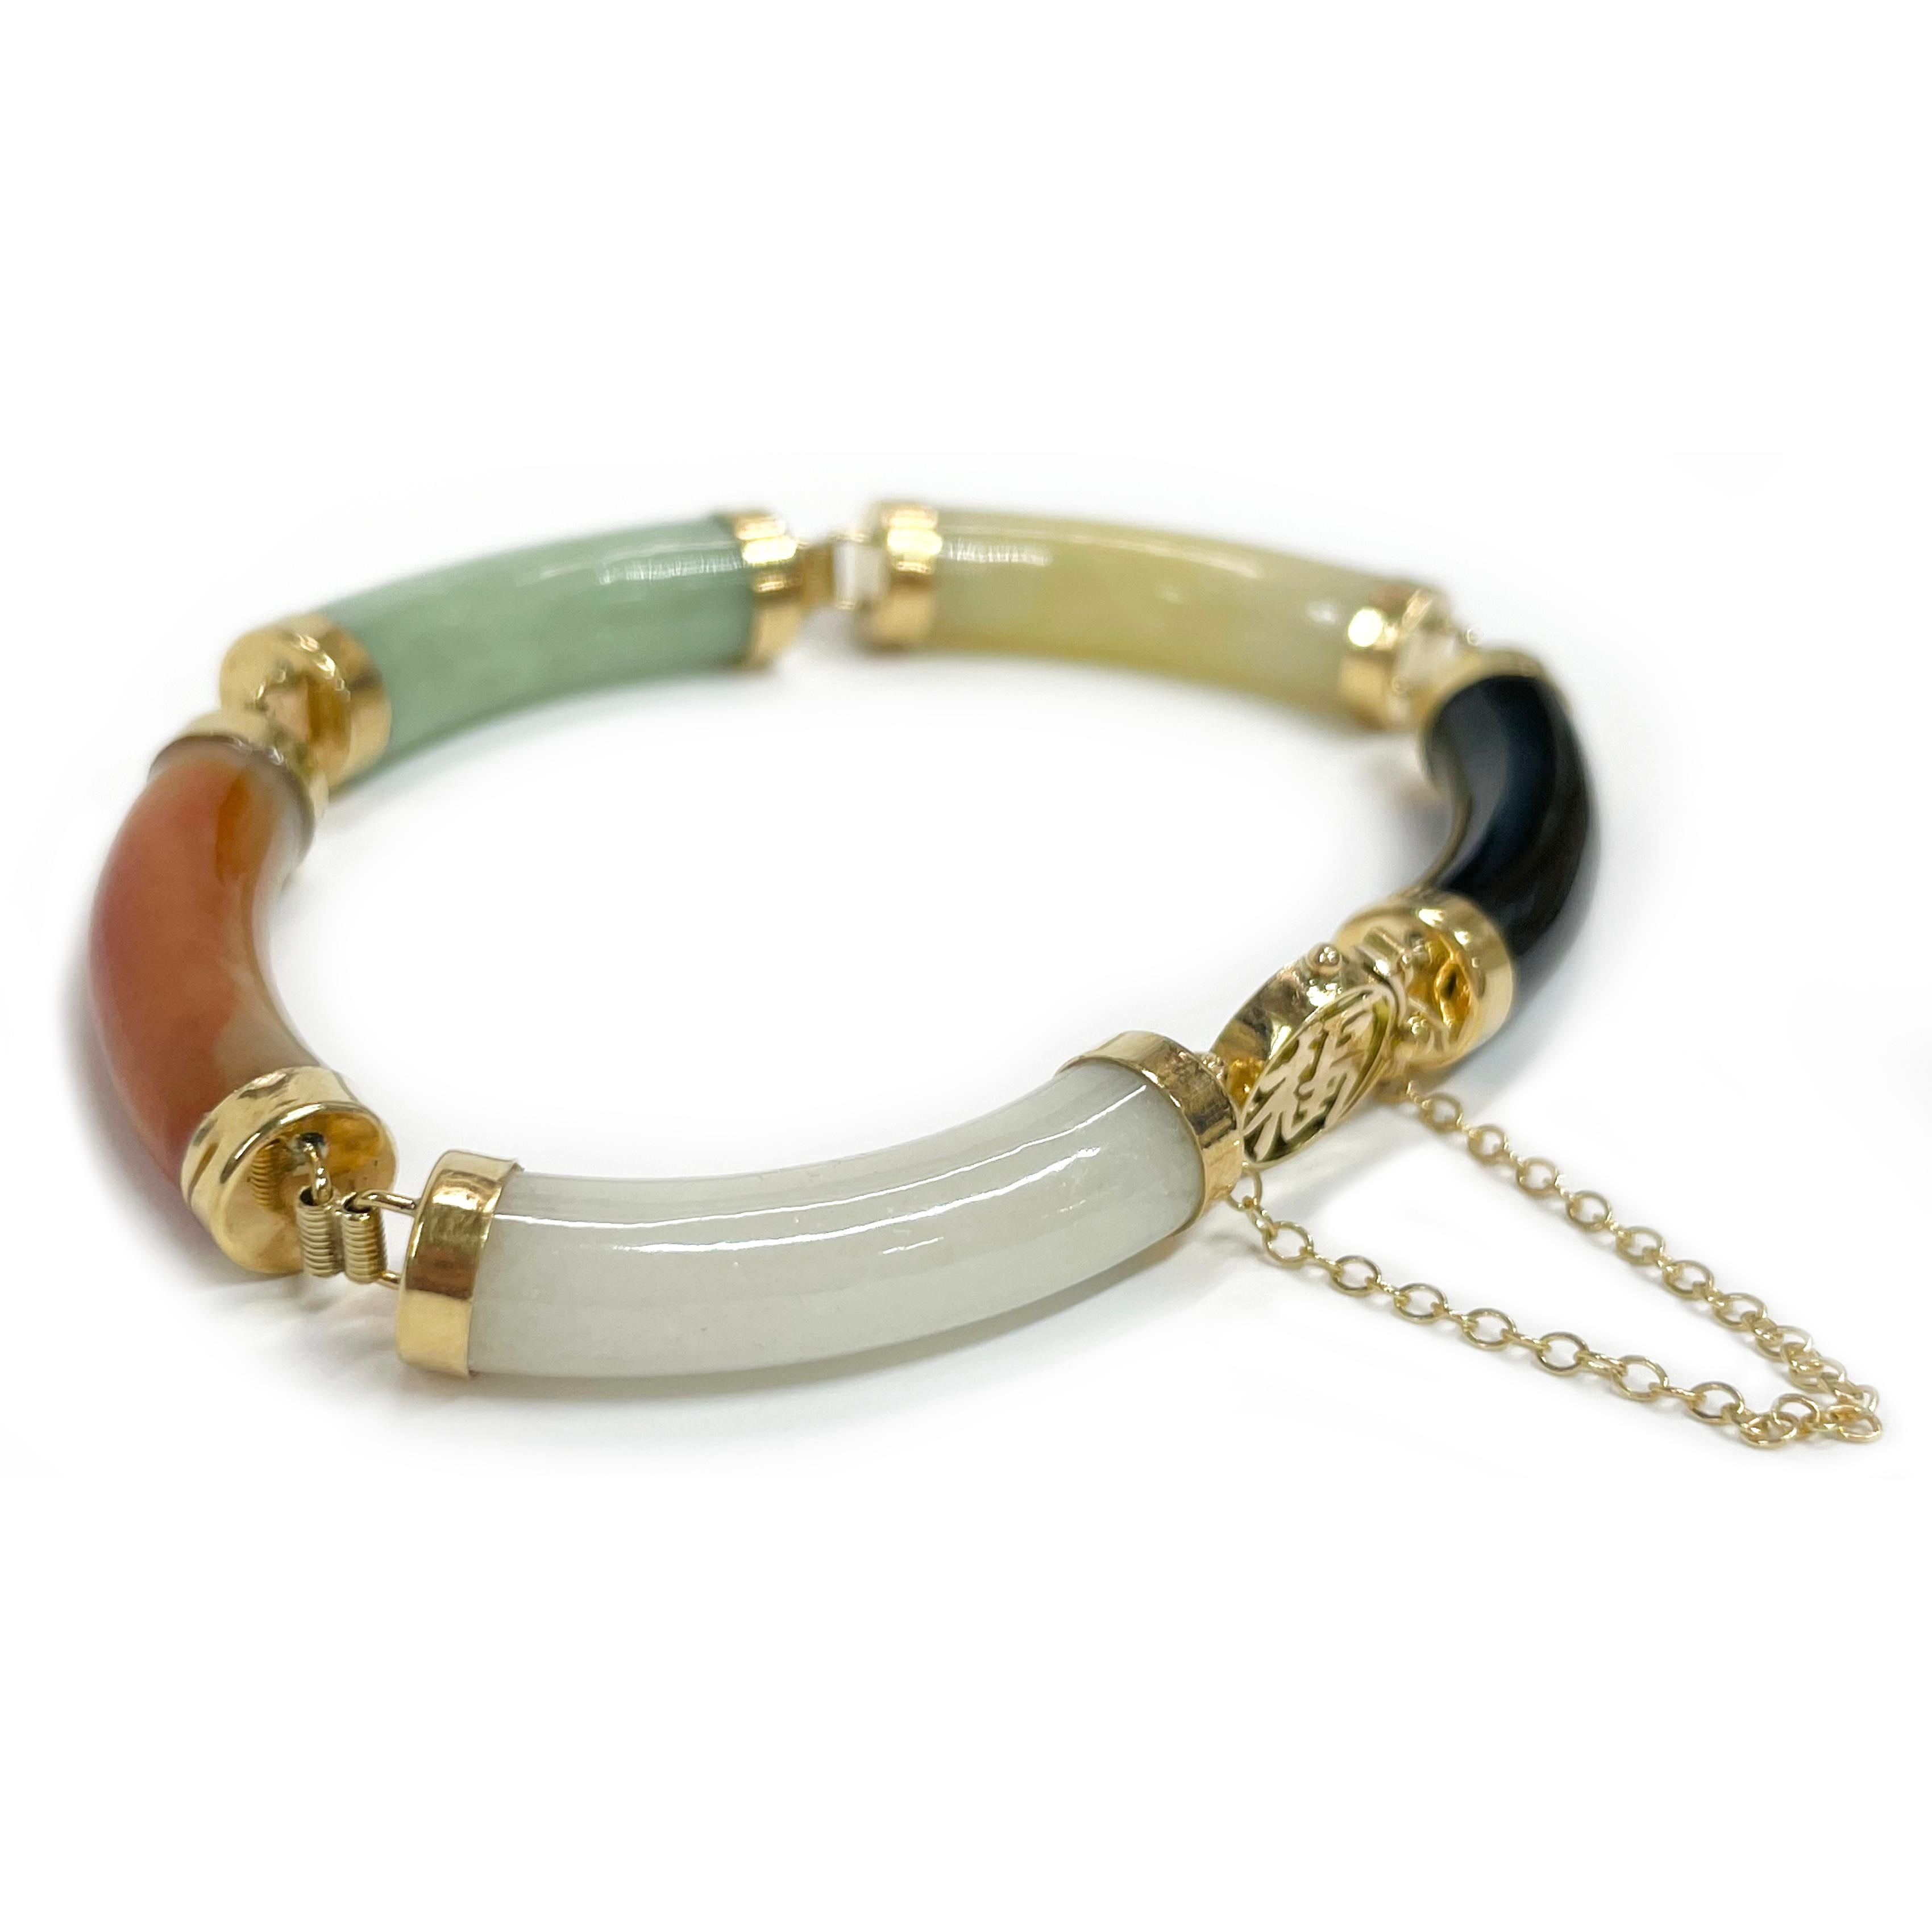 14 Karat Yellow Gold Chinese Multi-Color Jade Link Bracelet. The bracelet features curved tubes of white, marbled red and yellow, light green, and black Jade for a total of five links, each capped in 14k gold and linked with a hinge. The links are